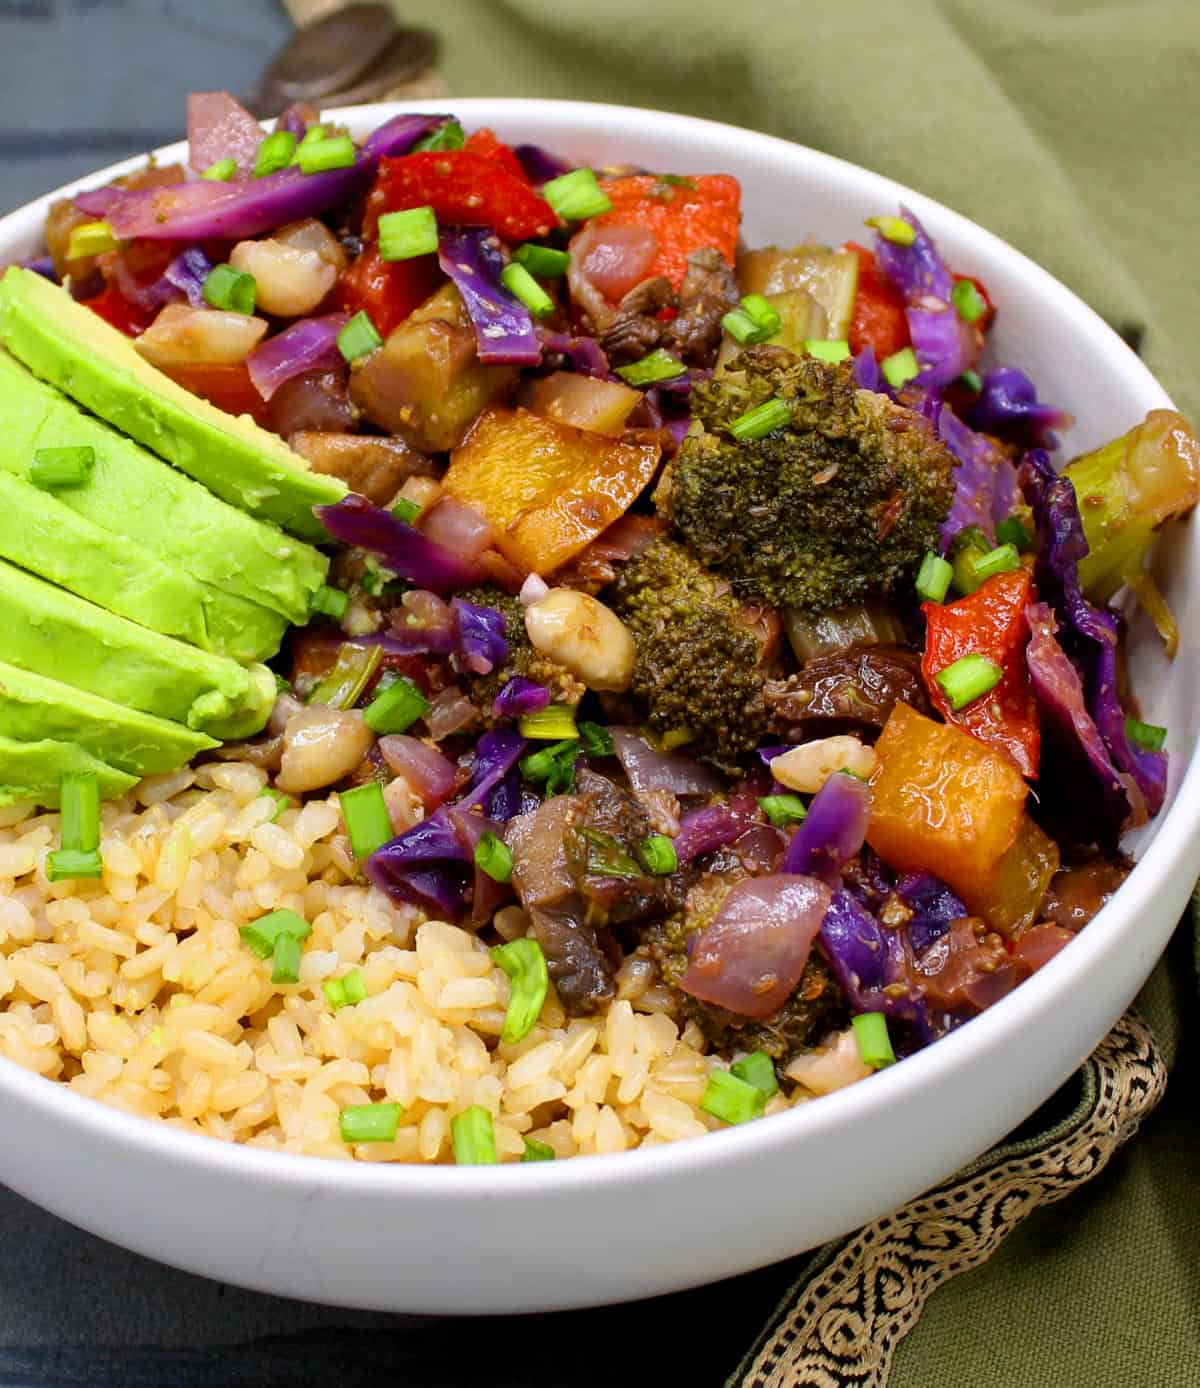 Kung pao vegetables served over rice in a bowl with avocado slices on the side.